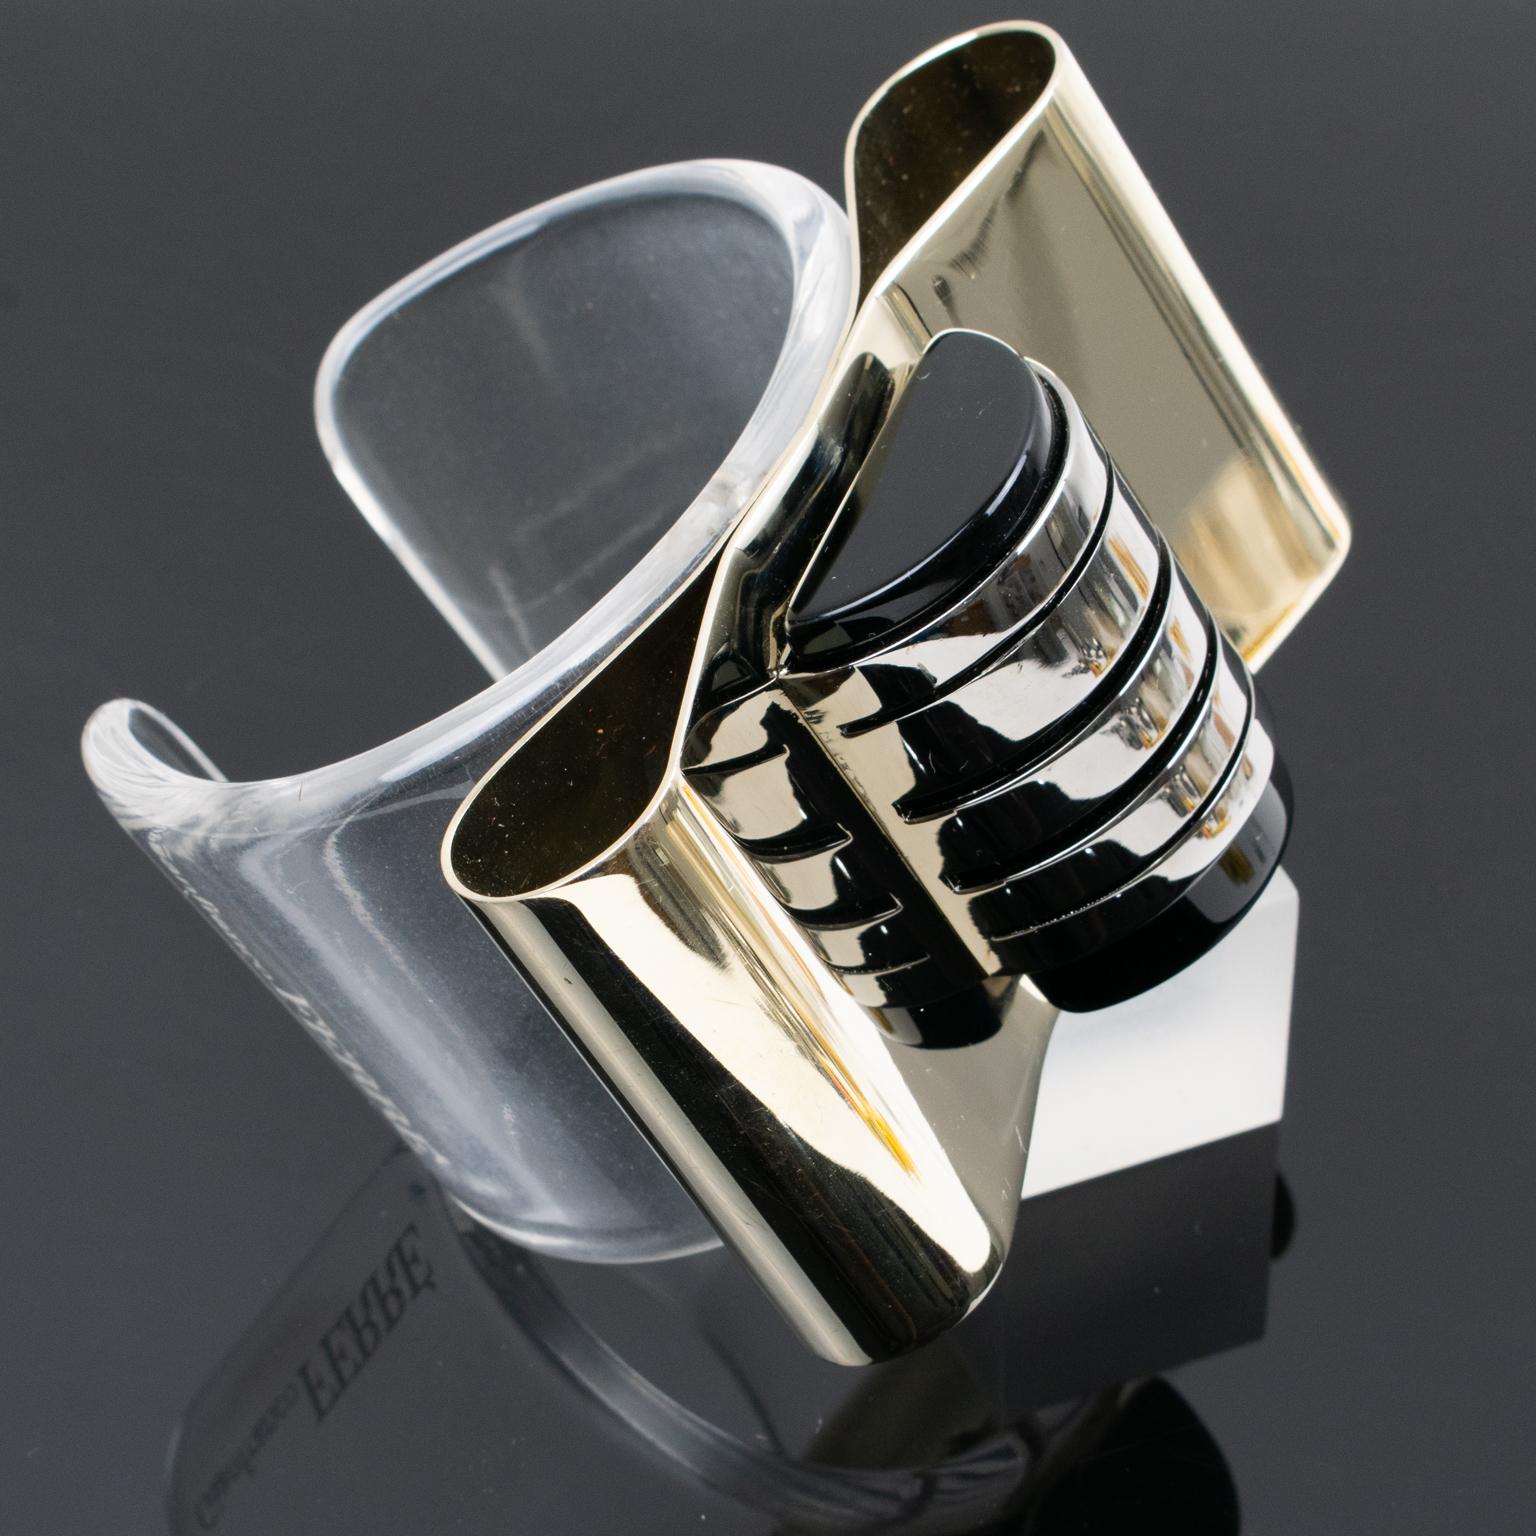 Gianfranco Ferre Art Deco Inspired Lucite and Metal Cuff Bracelet In Excellent Condition For Sale In Atlanta, GA